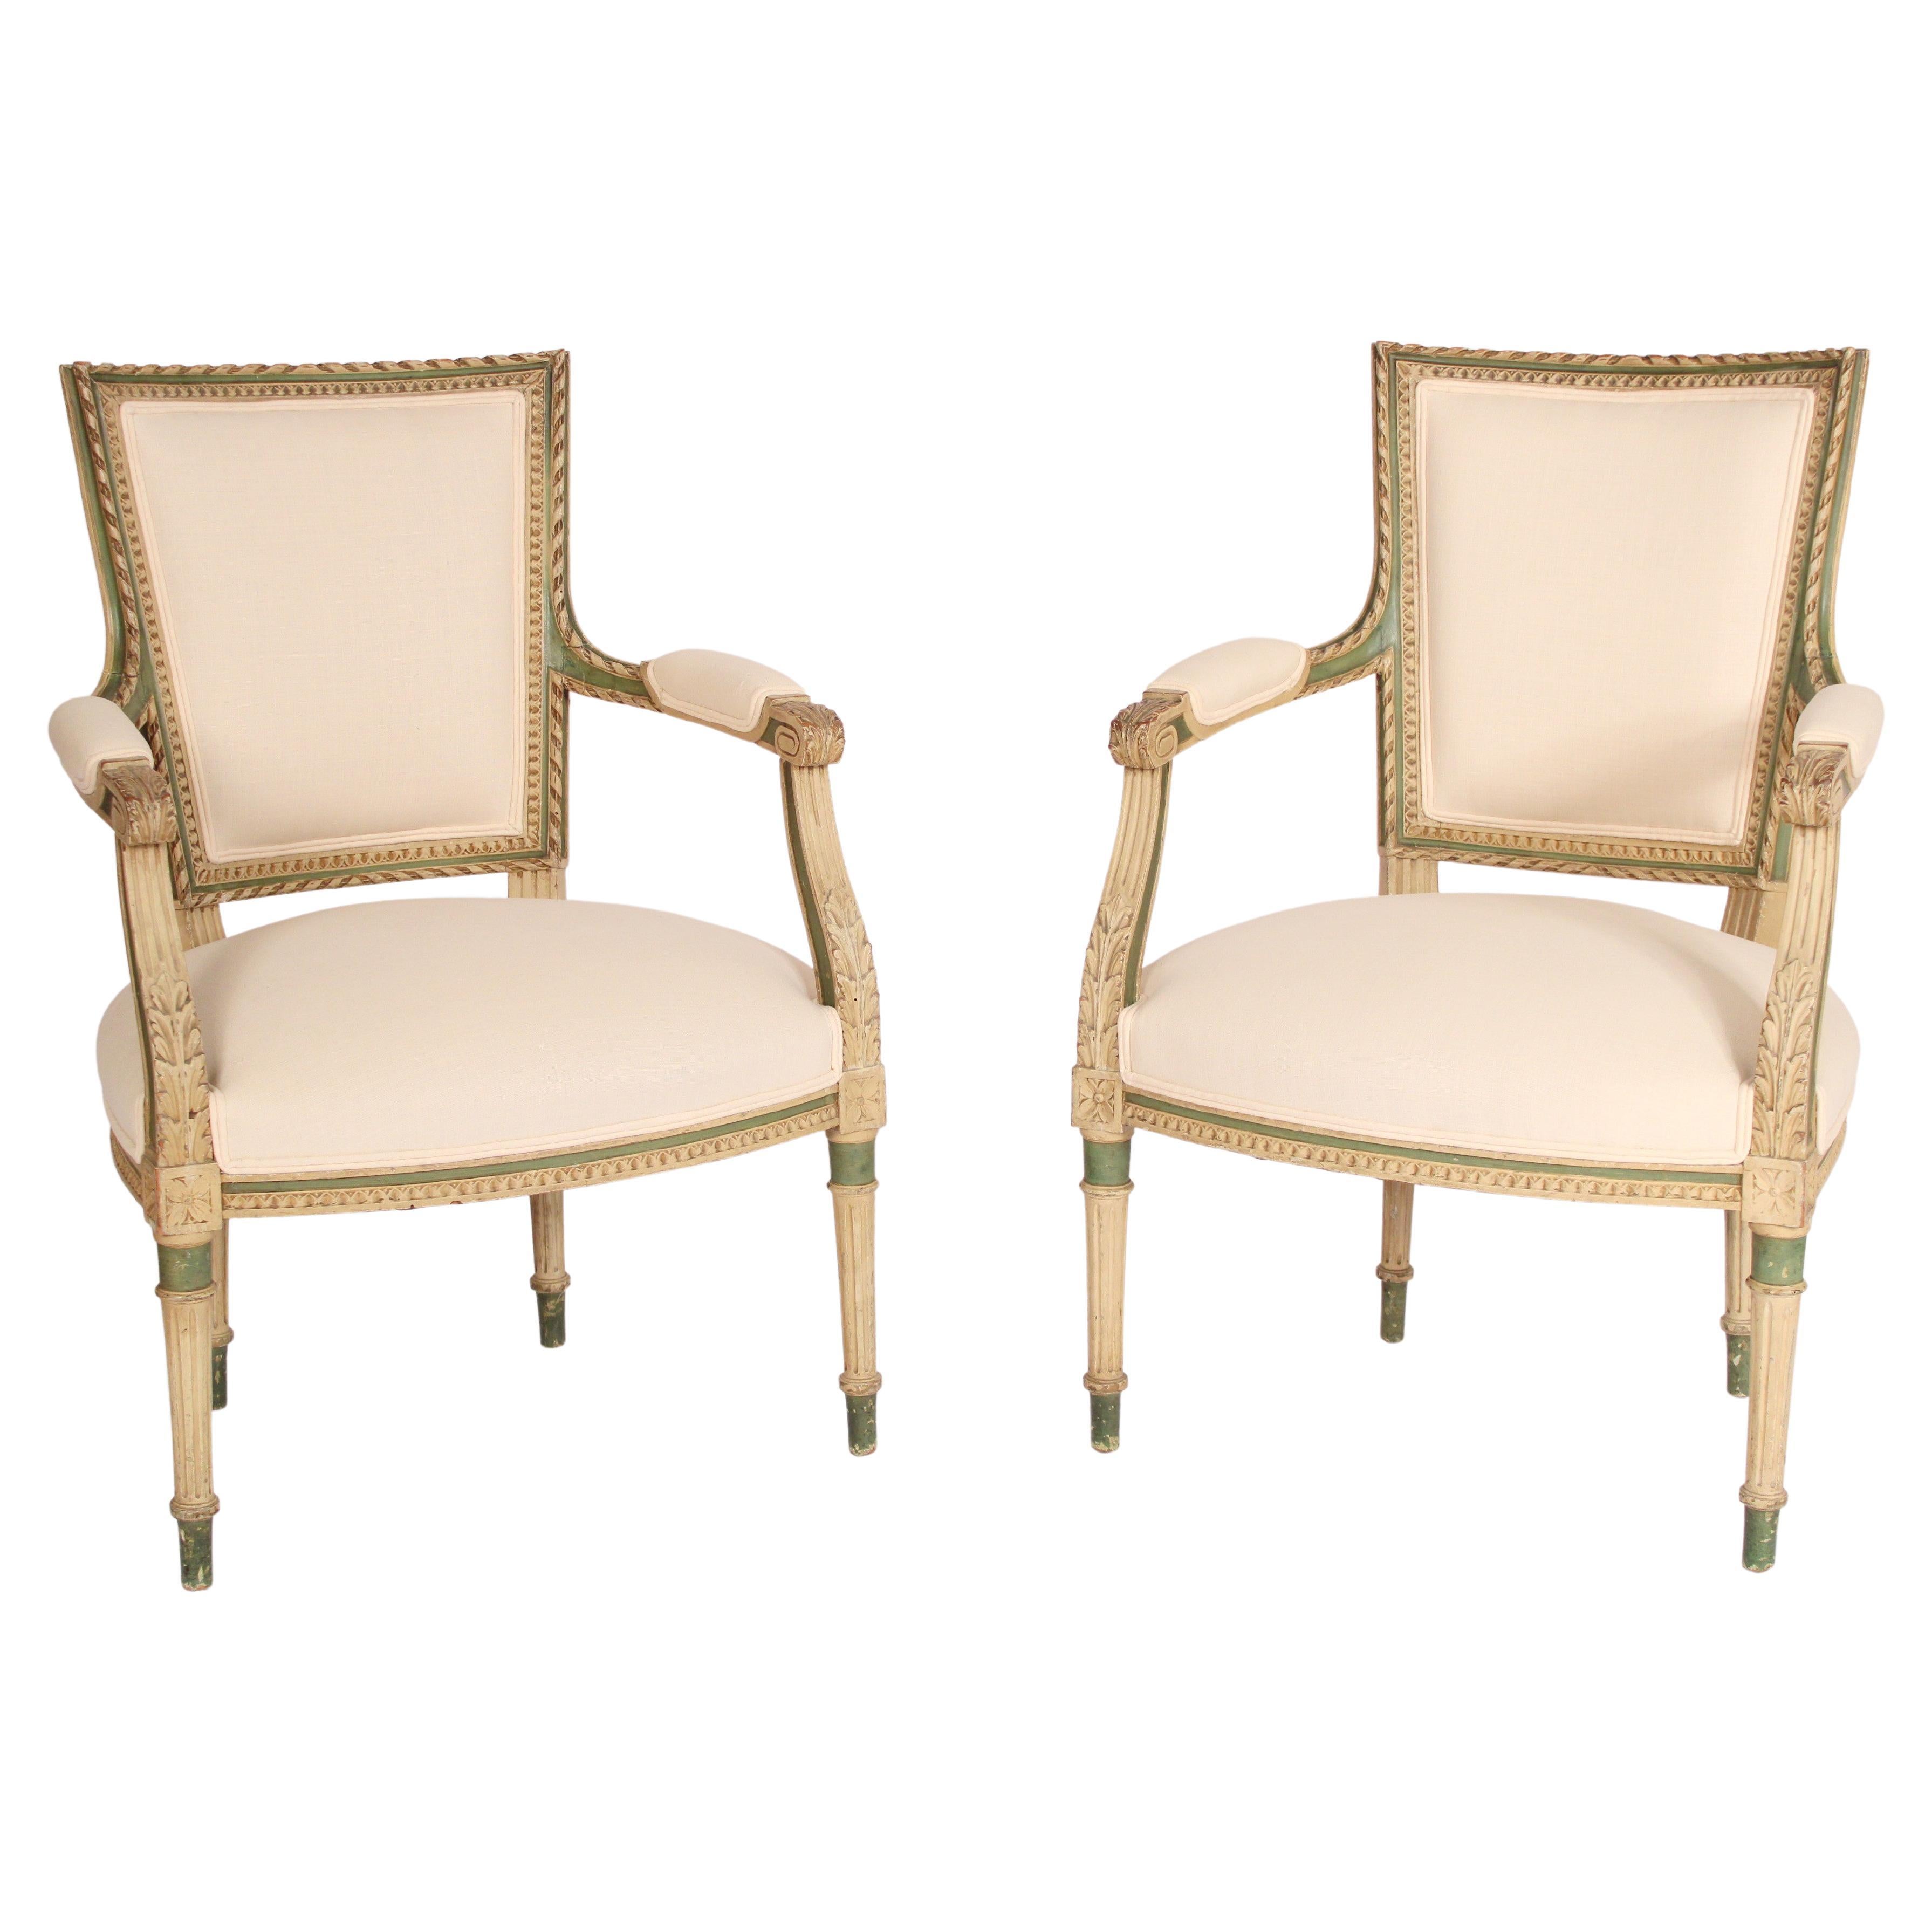 Pair of Louis XV Style Painted Armchairs